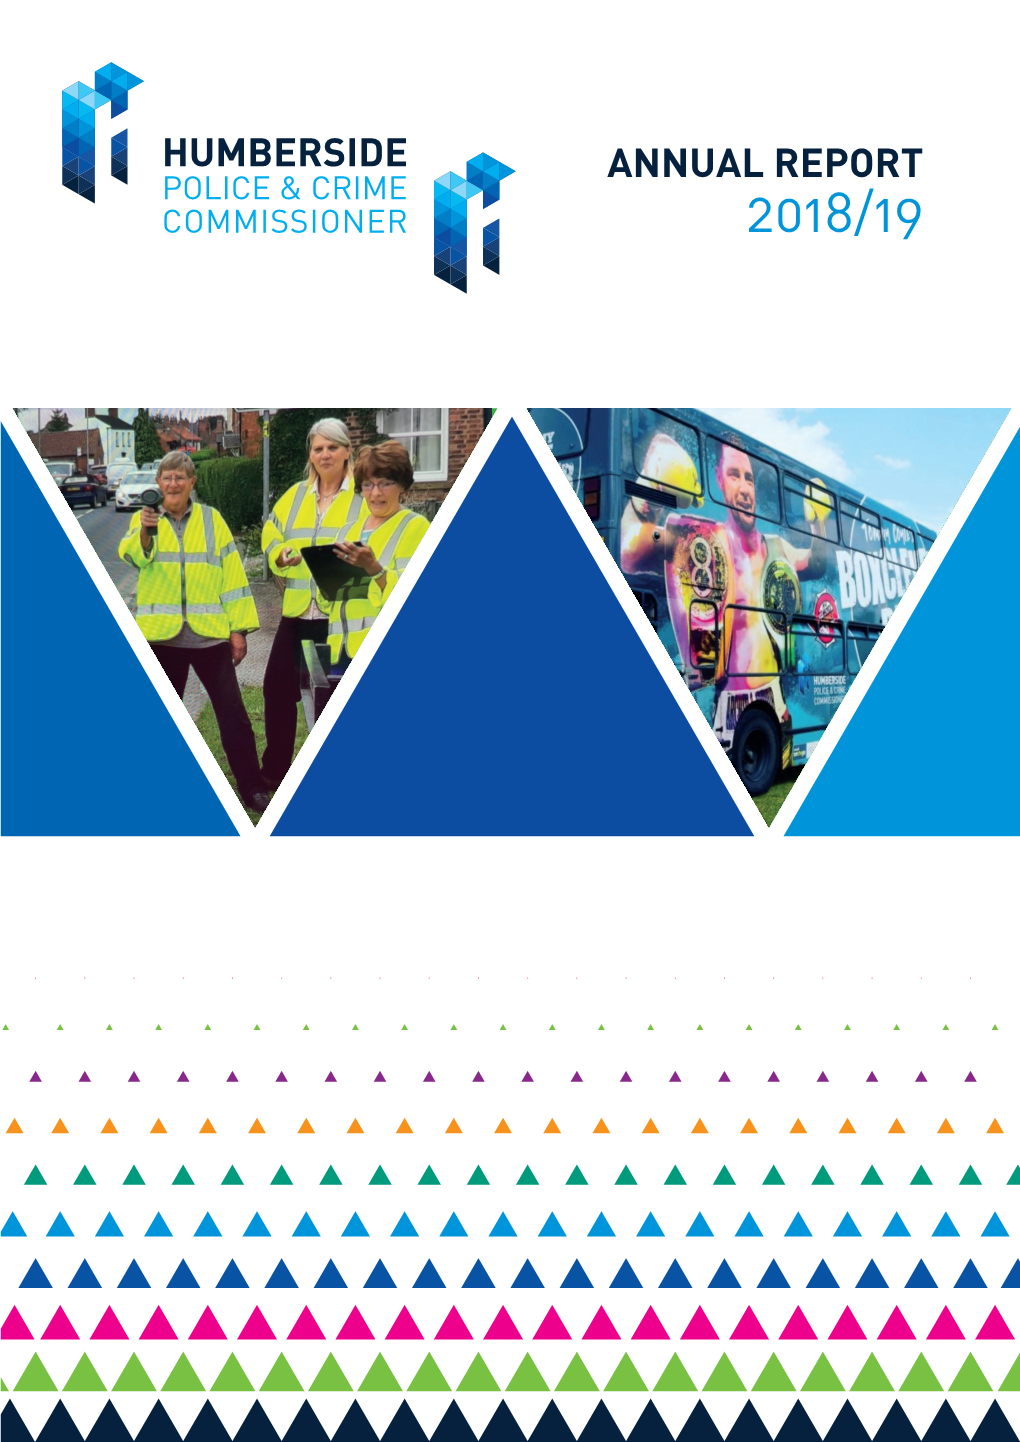 Agenda Item 6 Humberside Police and Crime Commissioner Annual Report 2018.19